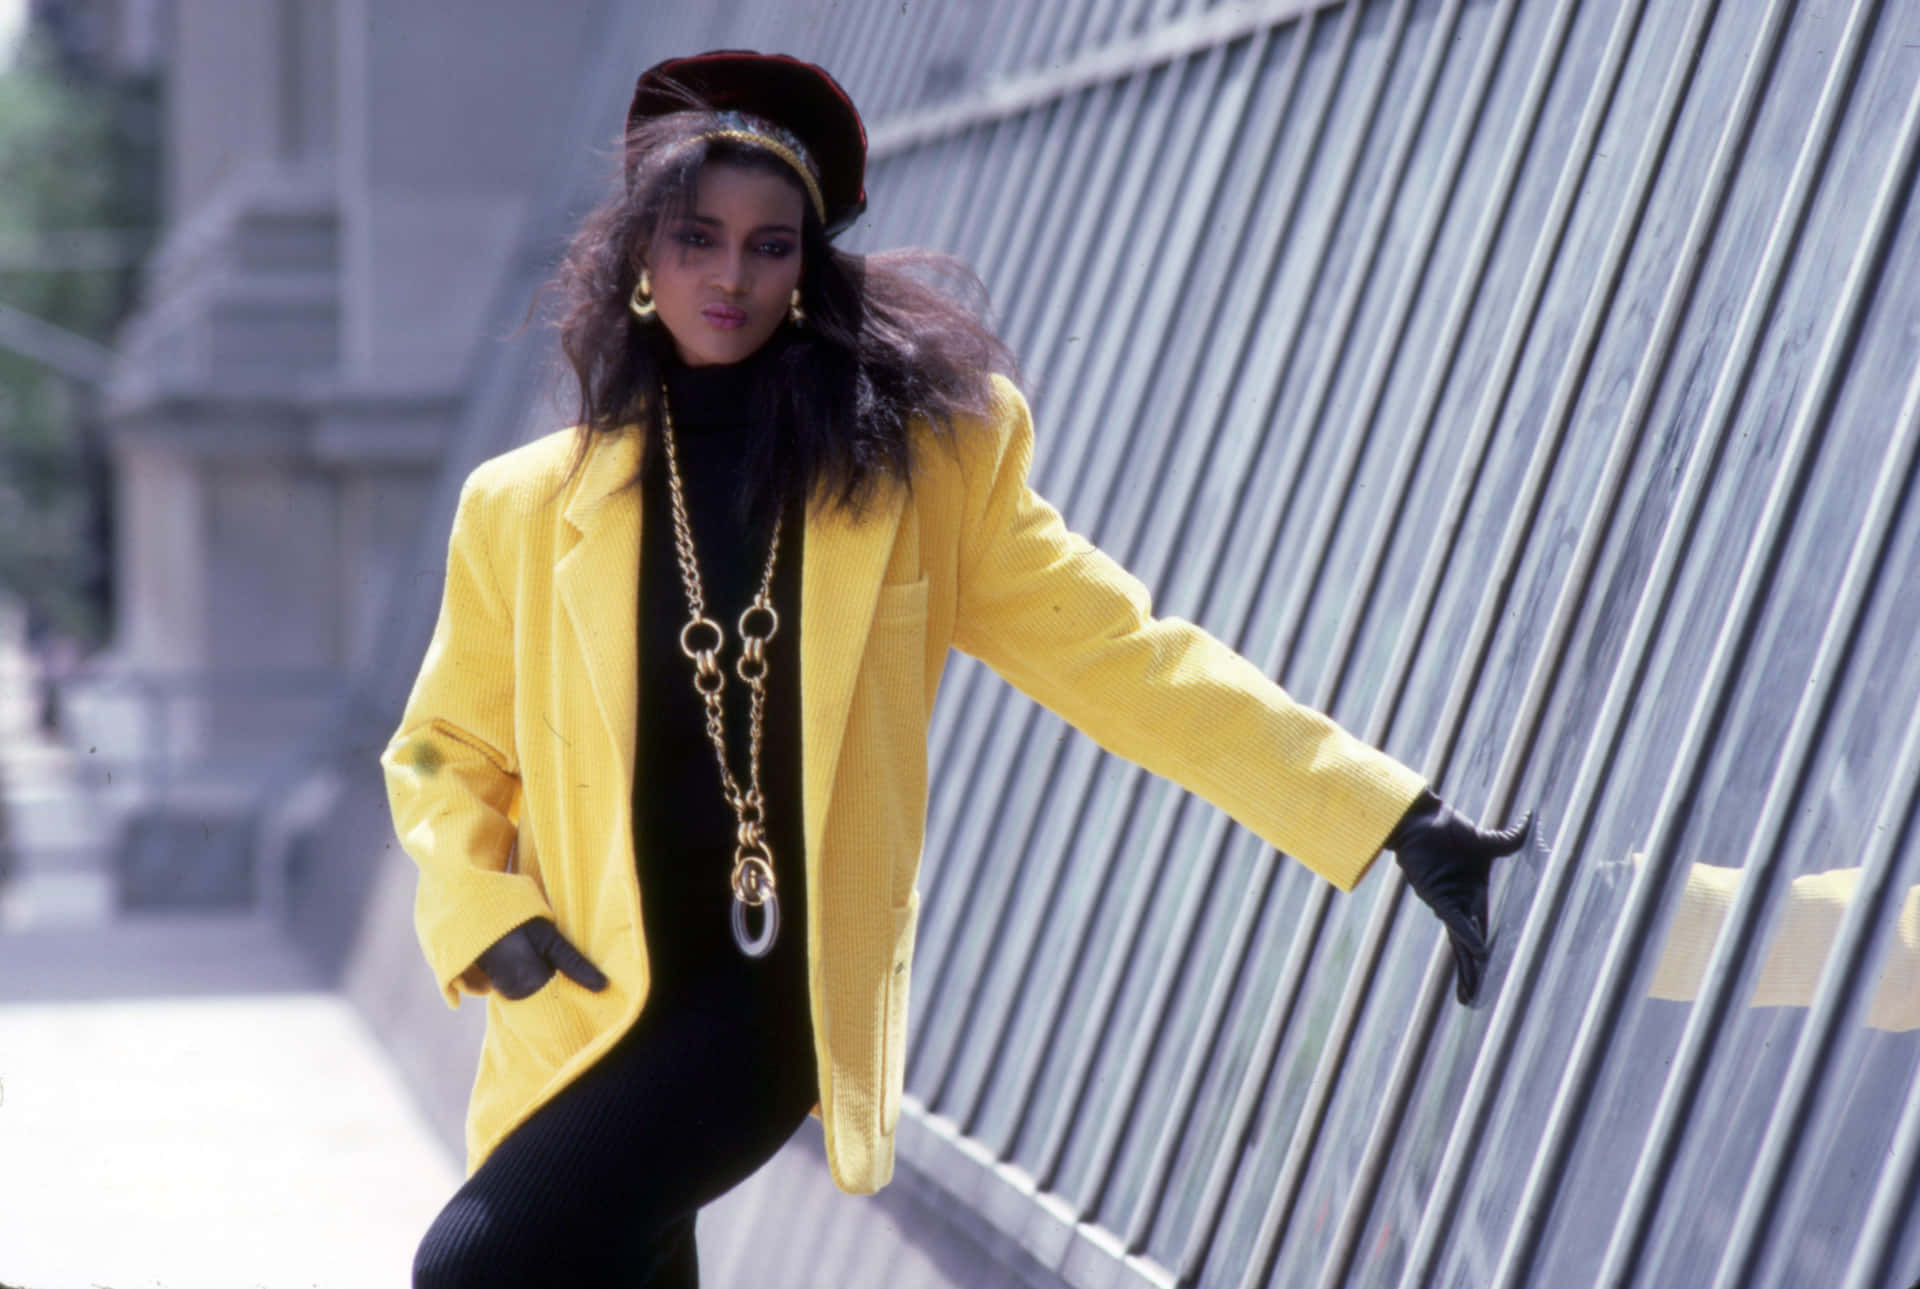 A Woman In A Yellow Jacket Leaning Against A Wall